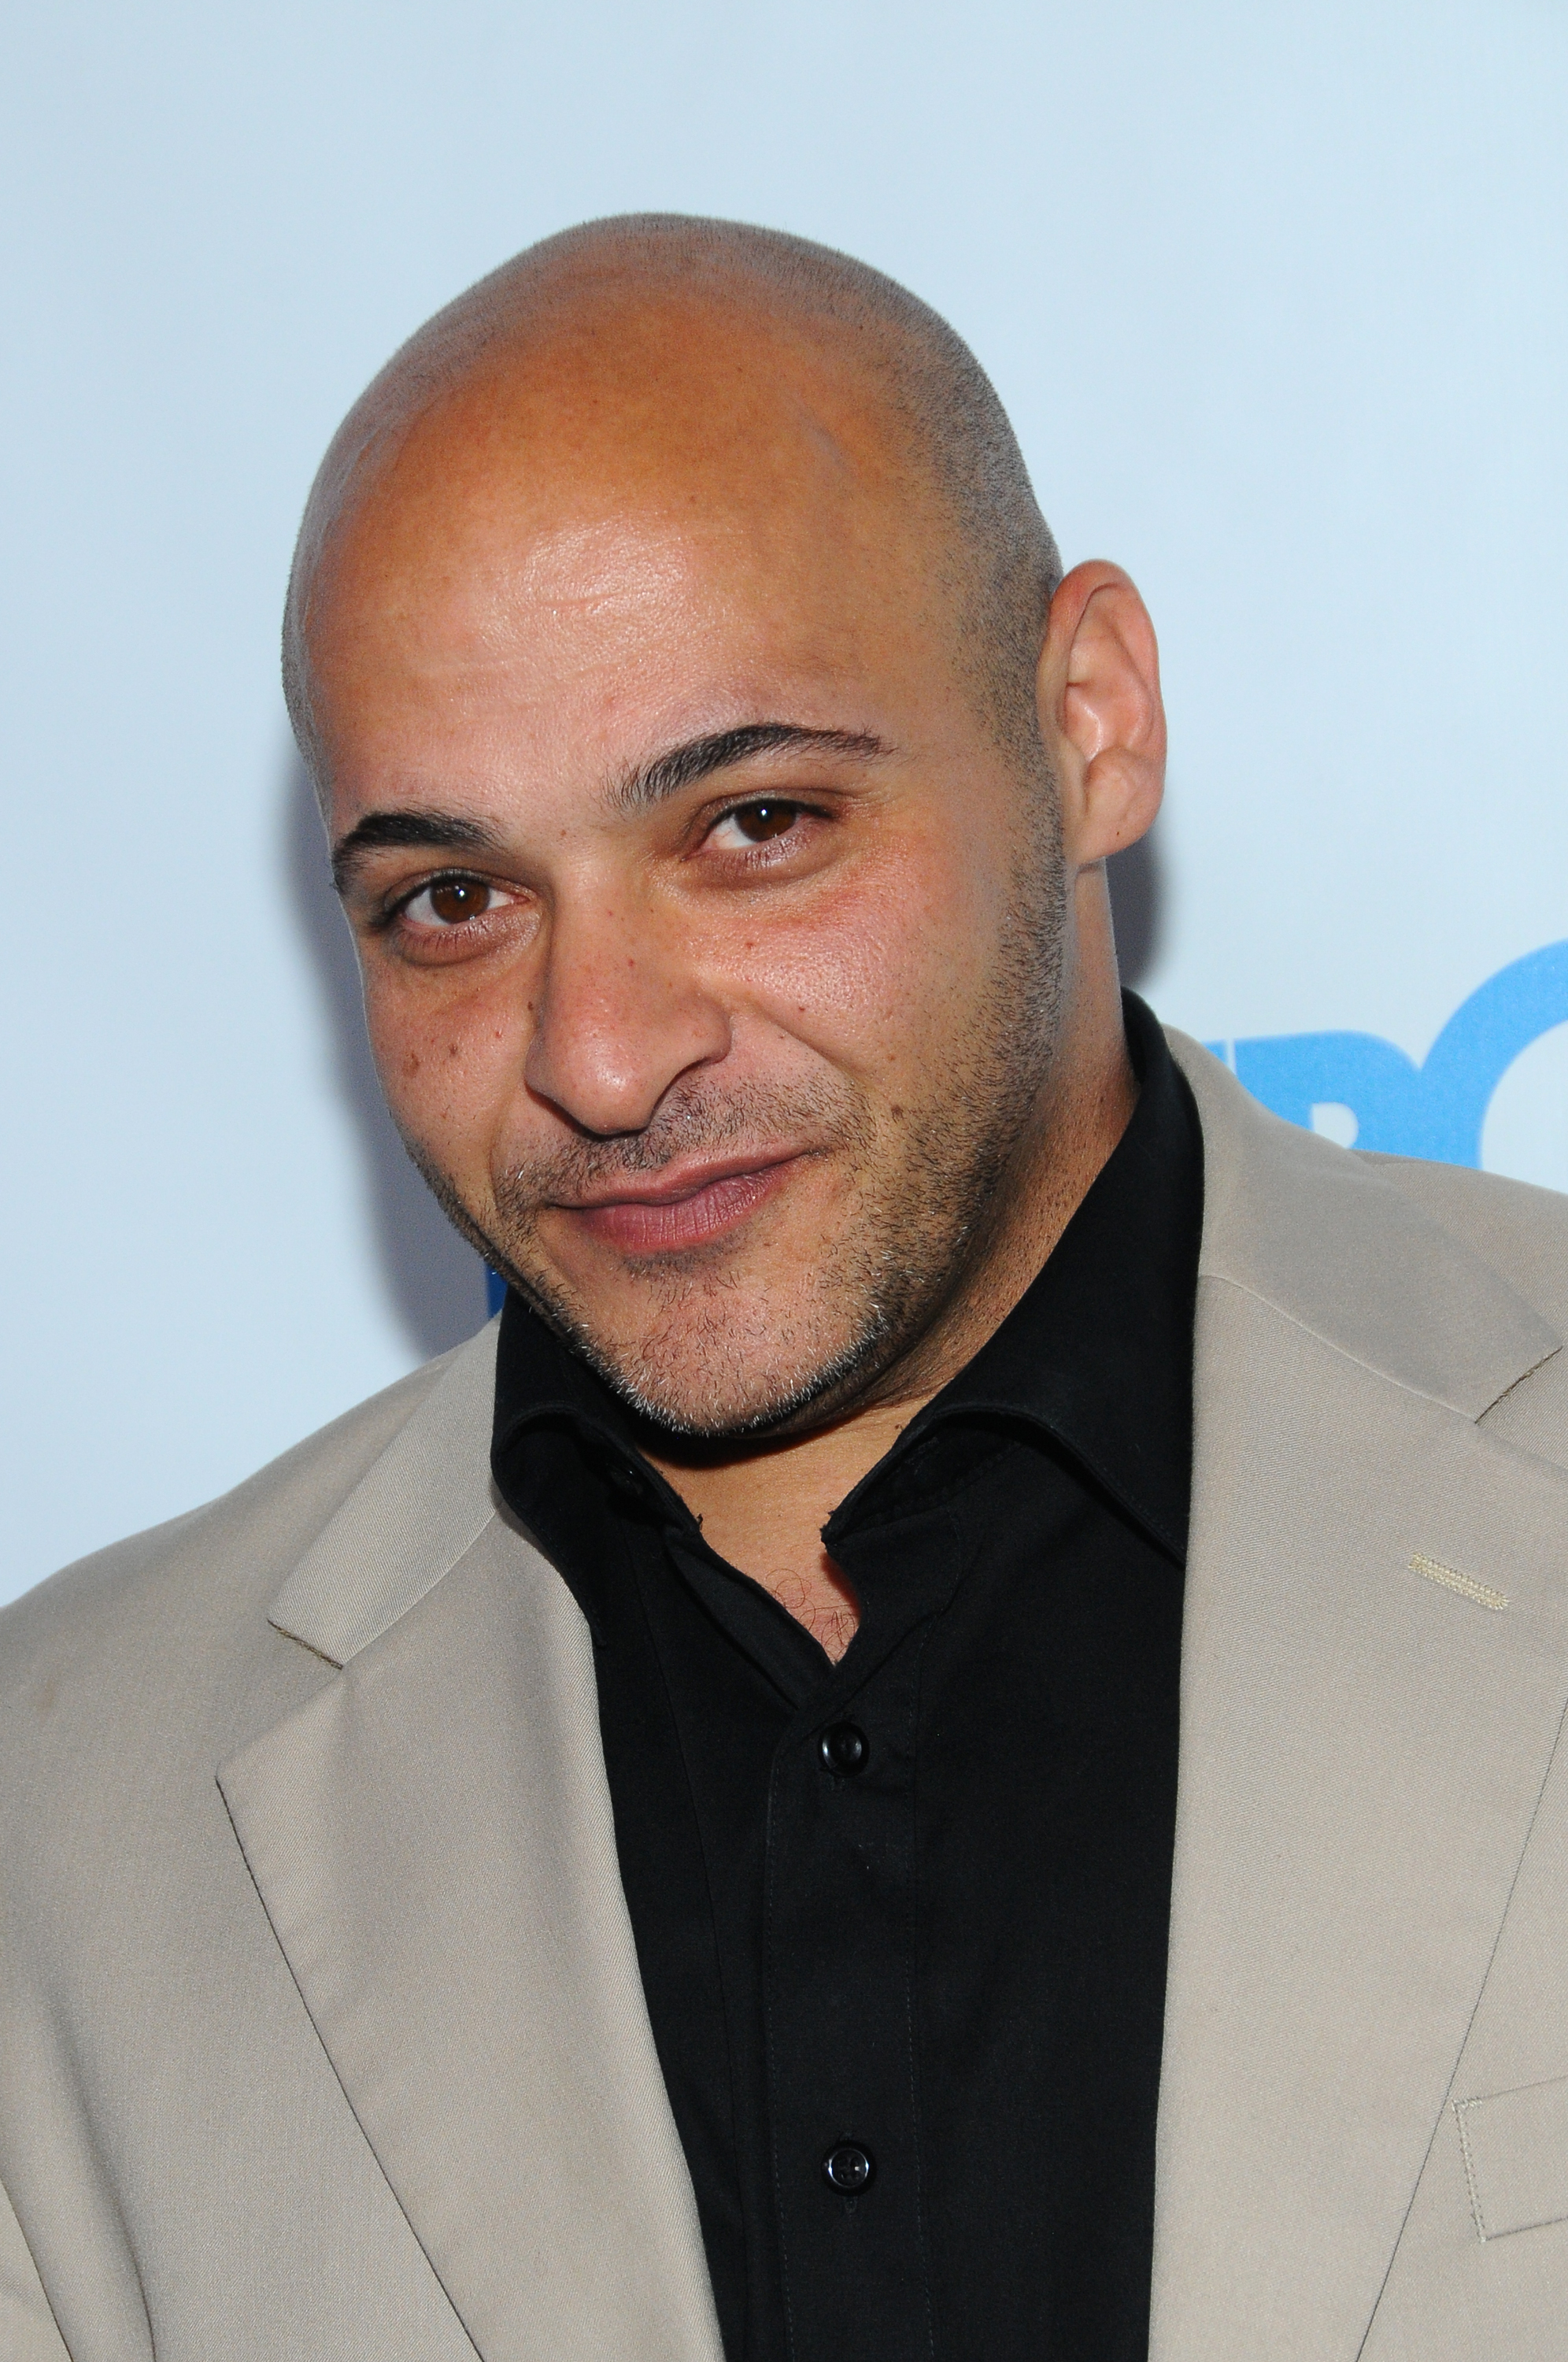 Breaking Bad star Mike Batayeh died after suffering a heart attack at the beginning of June